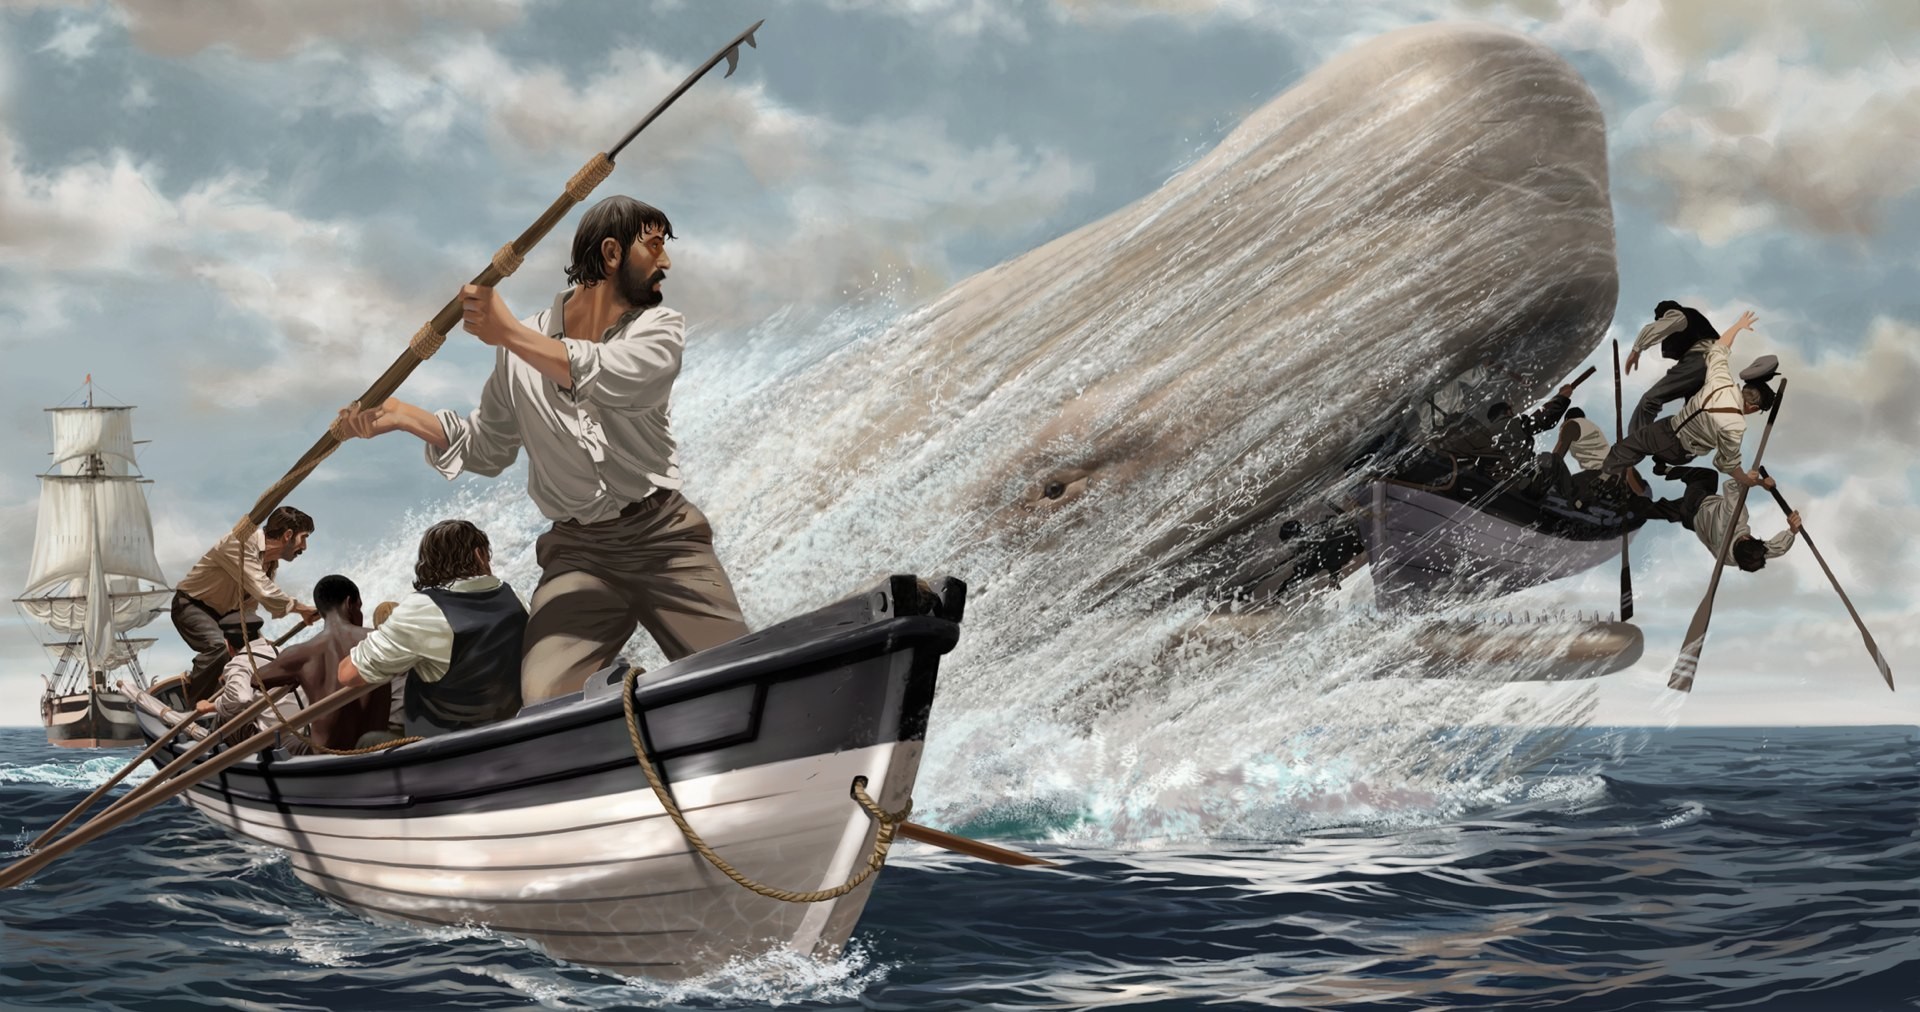 General 1920x1012 nature animals sea Moby Dick whale artwork men boat ship waves fighting